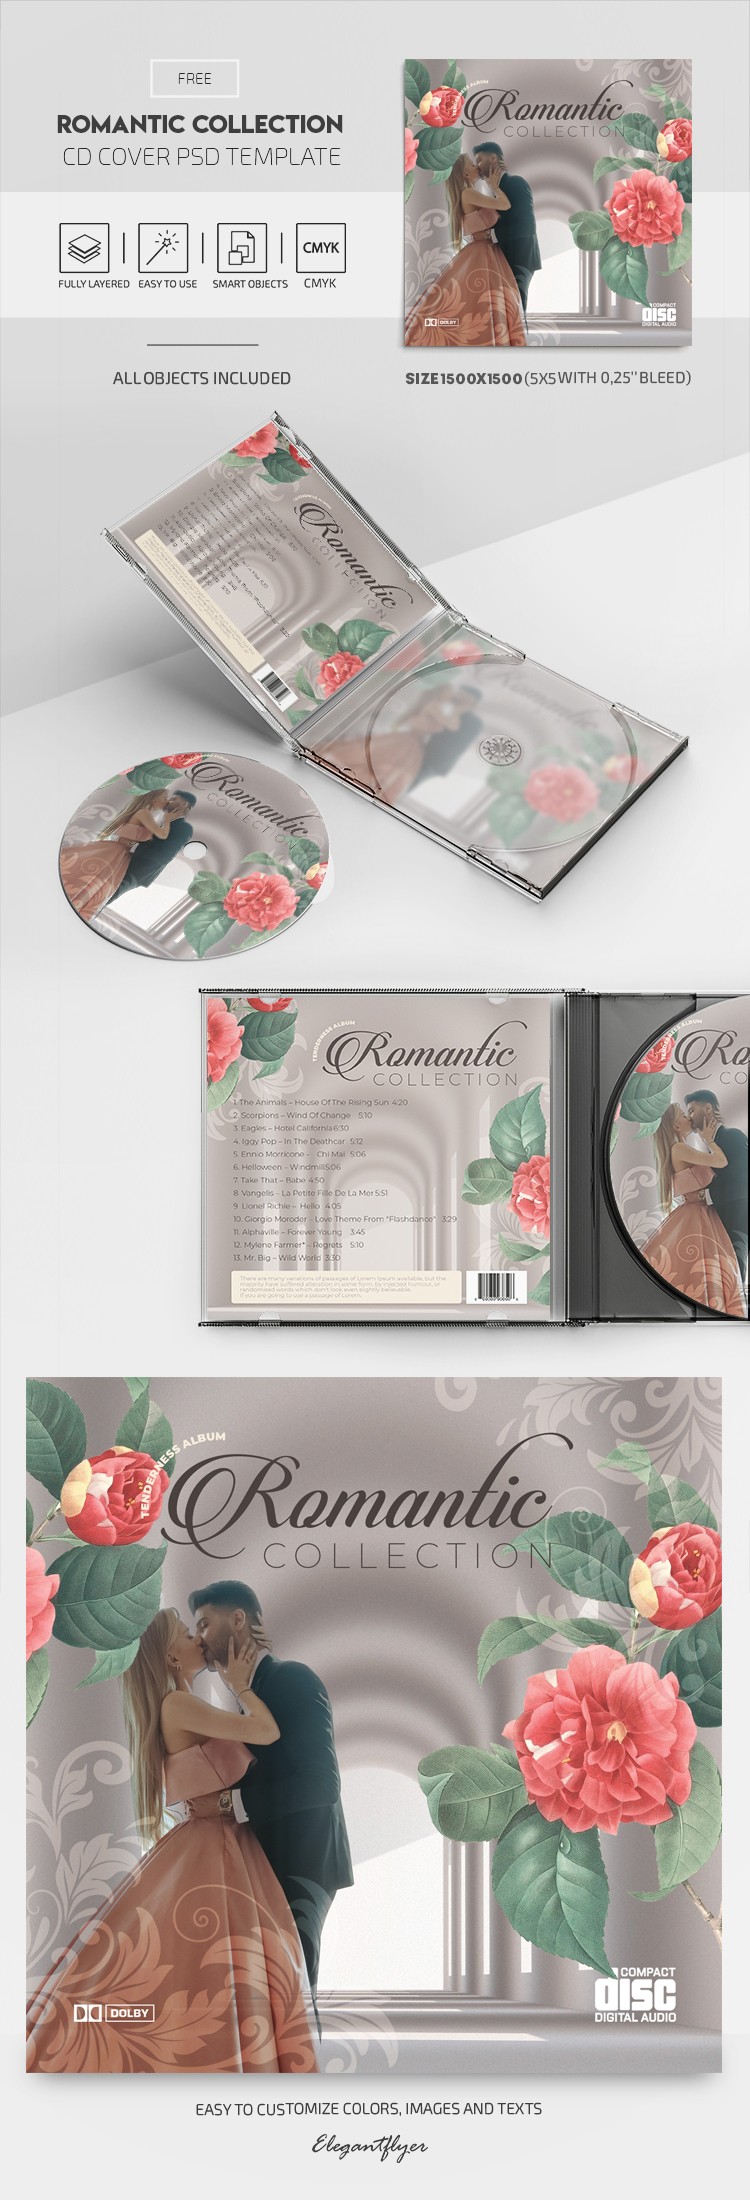 Romantic Collection CD Cover by ElegantFlyer